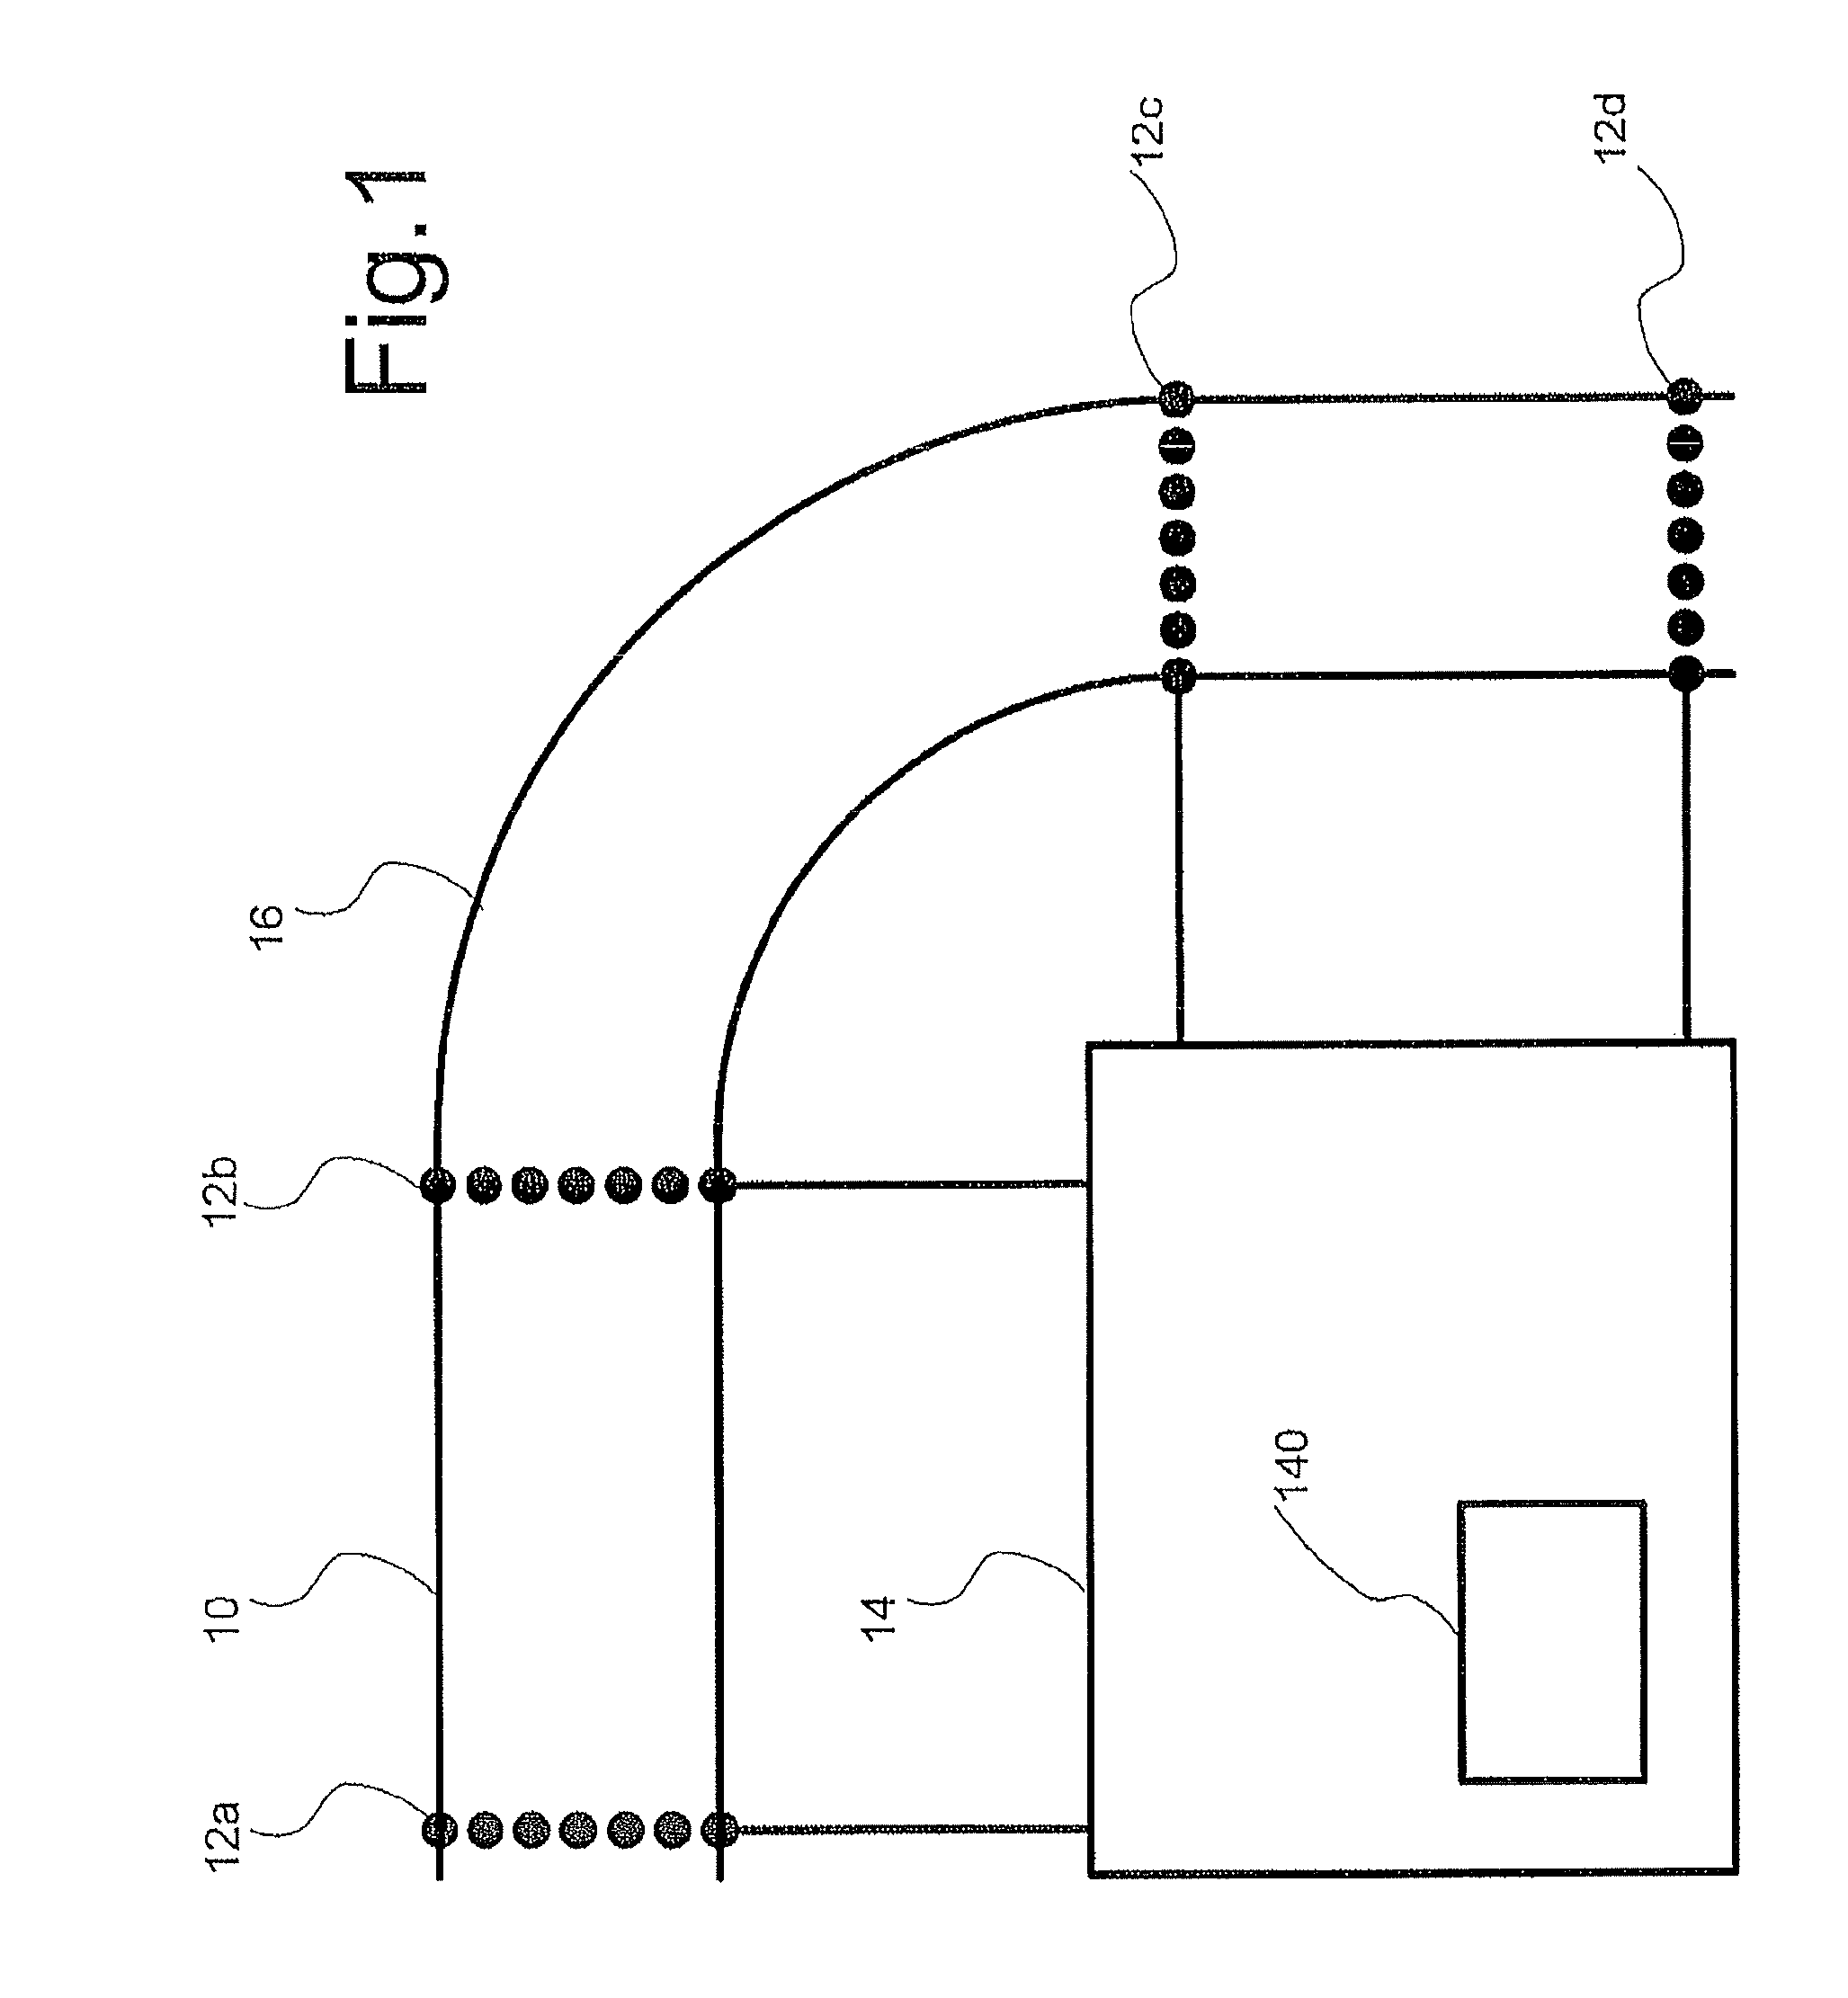 System and method for performing ultrasonic pipeline wall property measurements